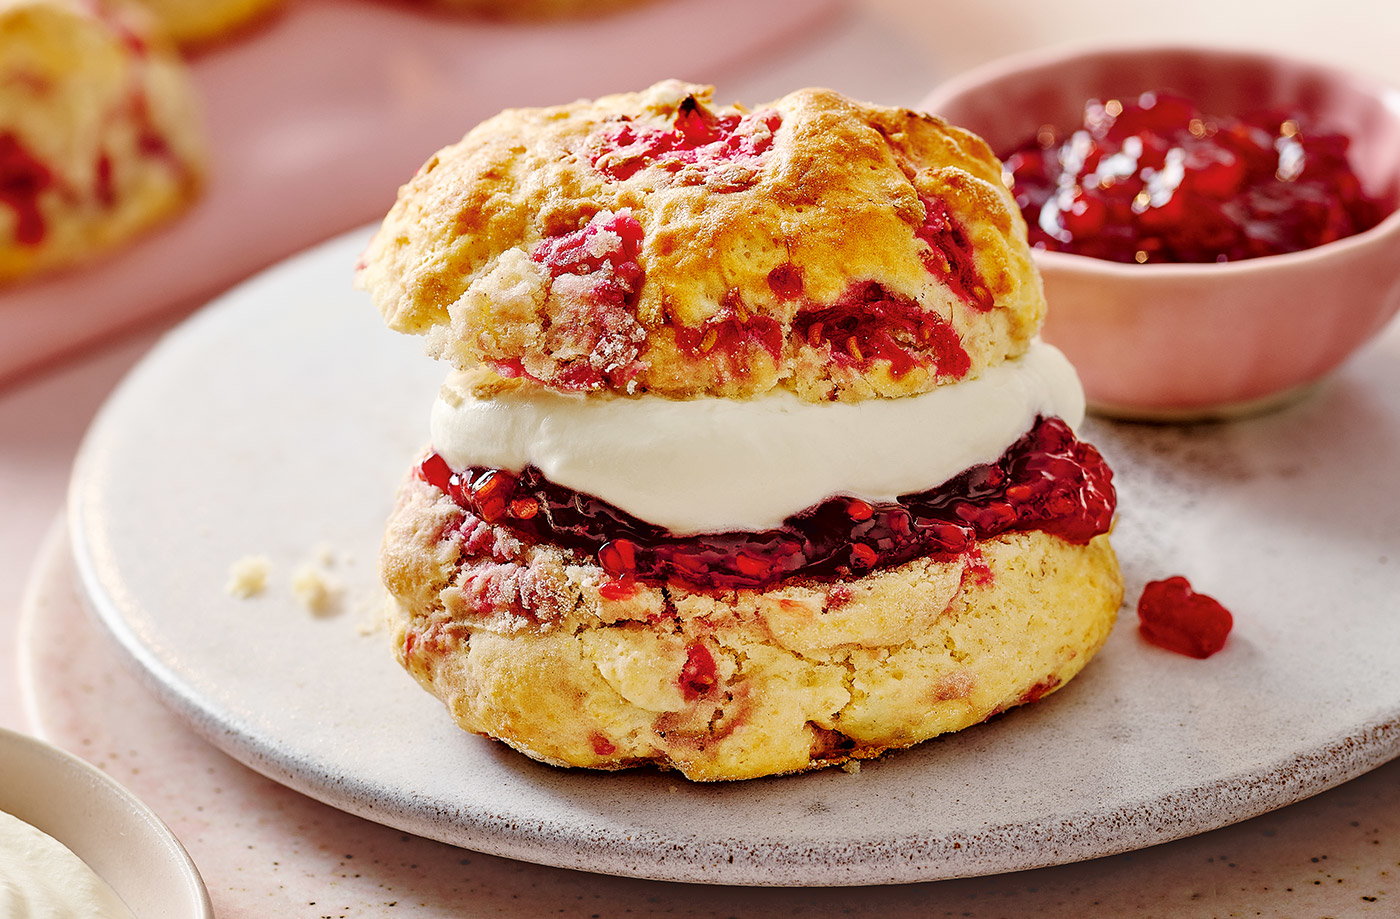 35 interesting facts about scones